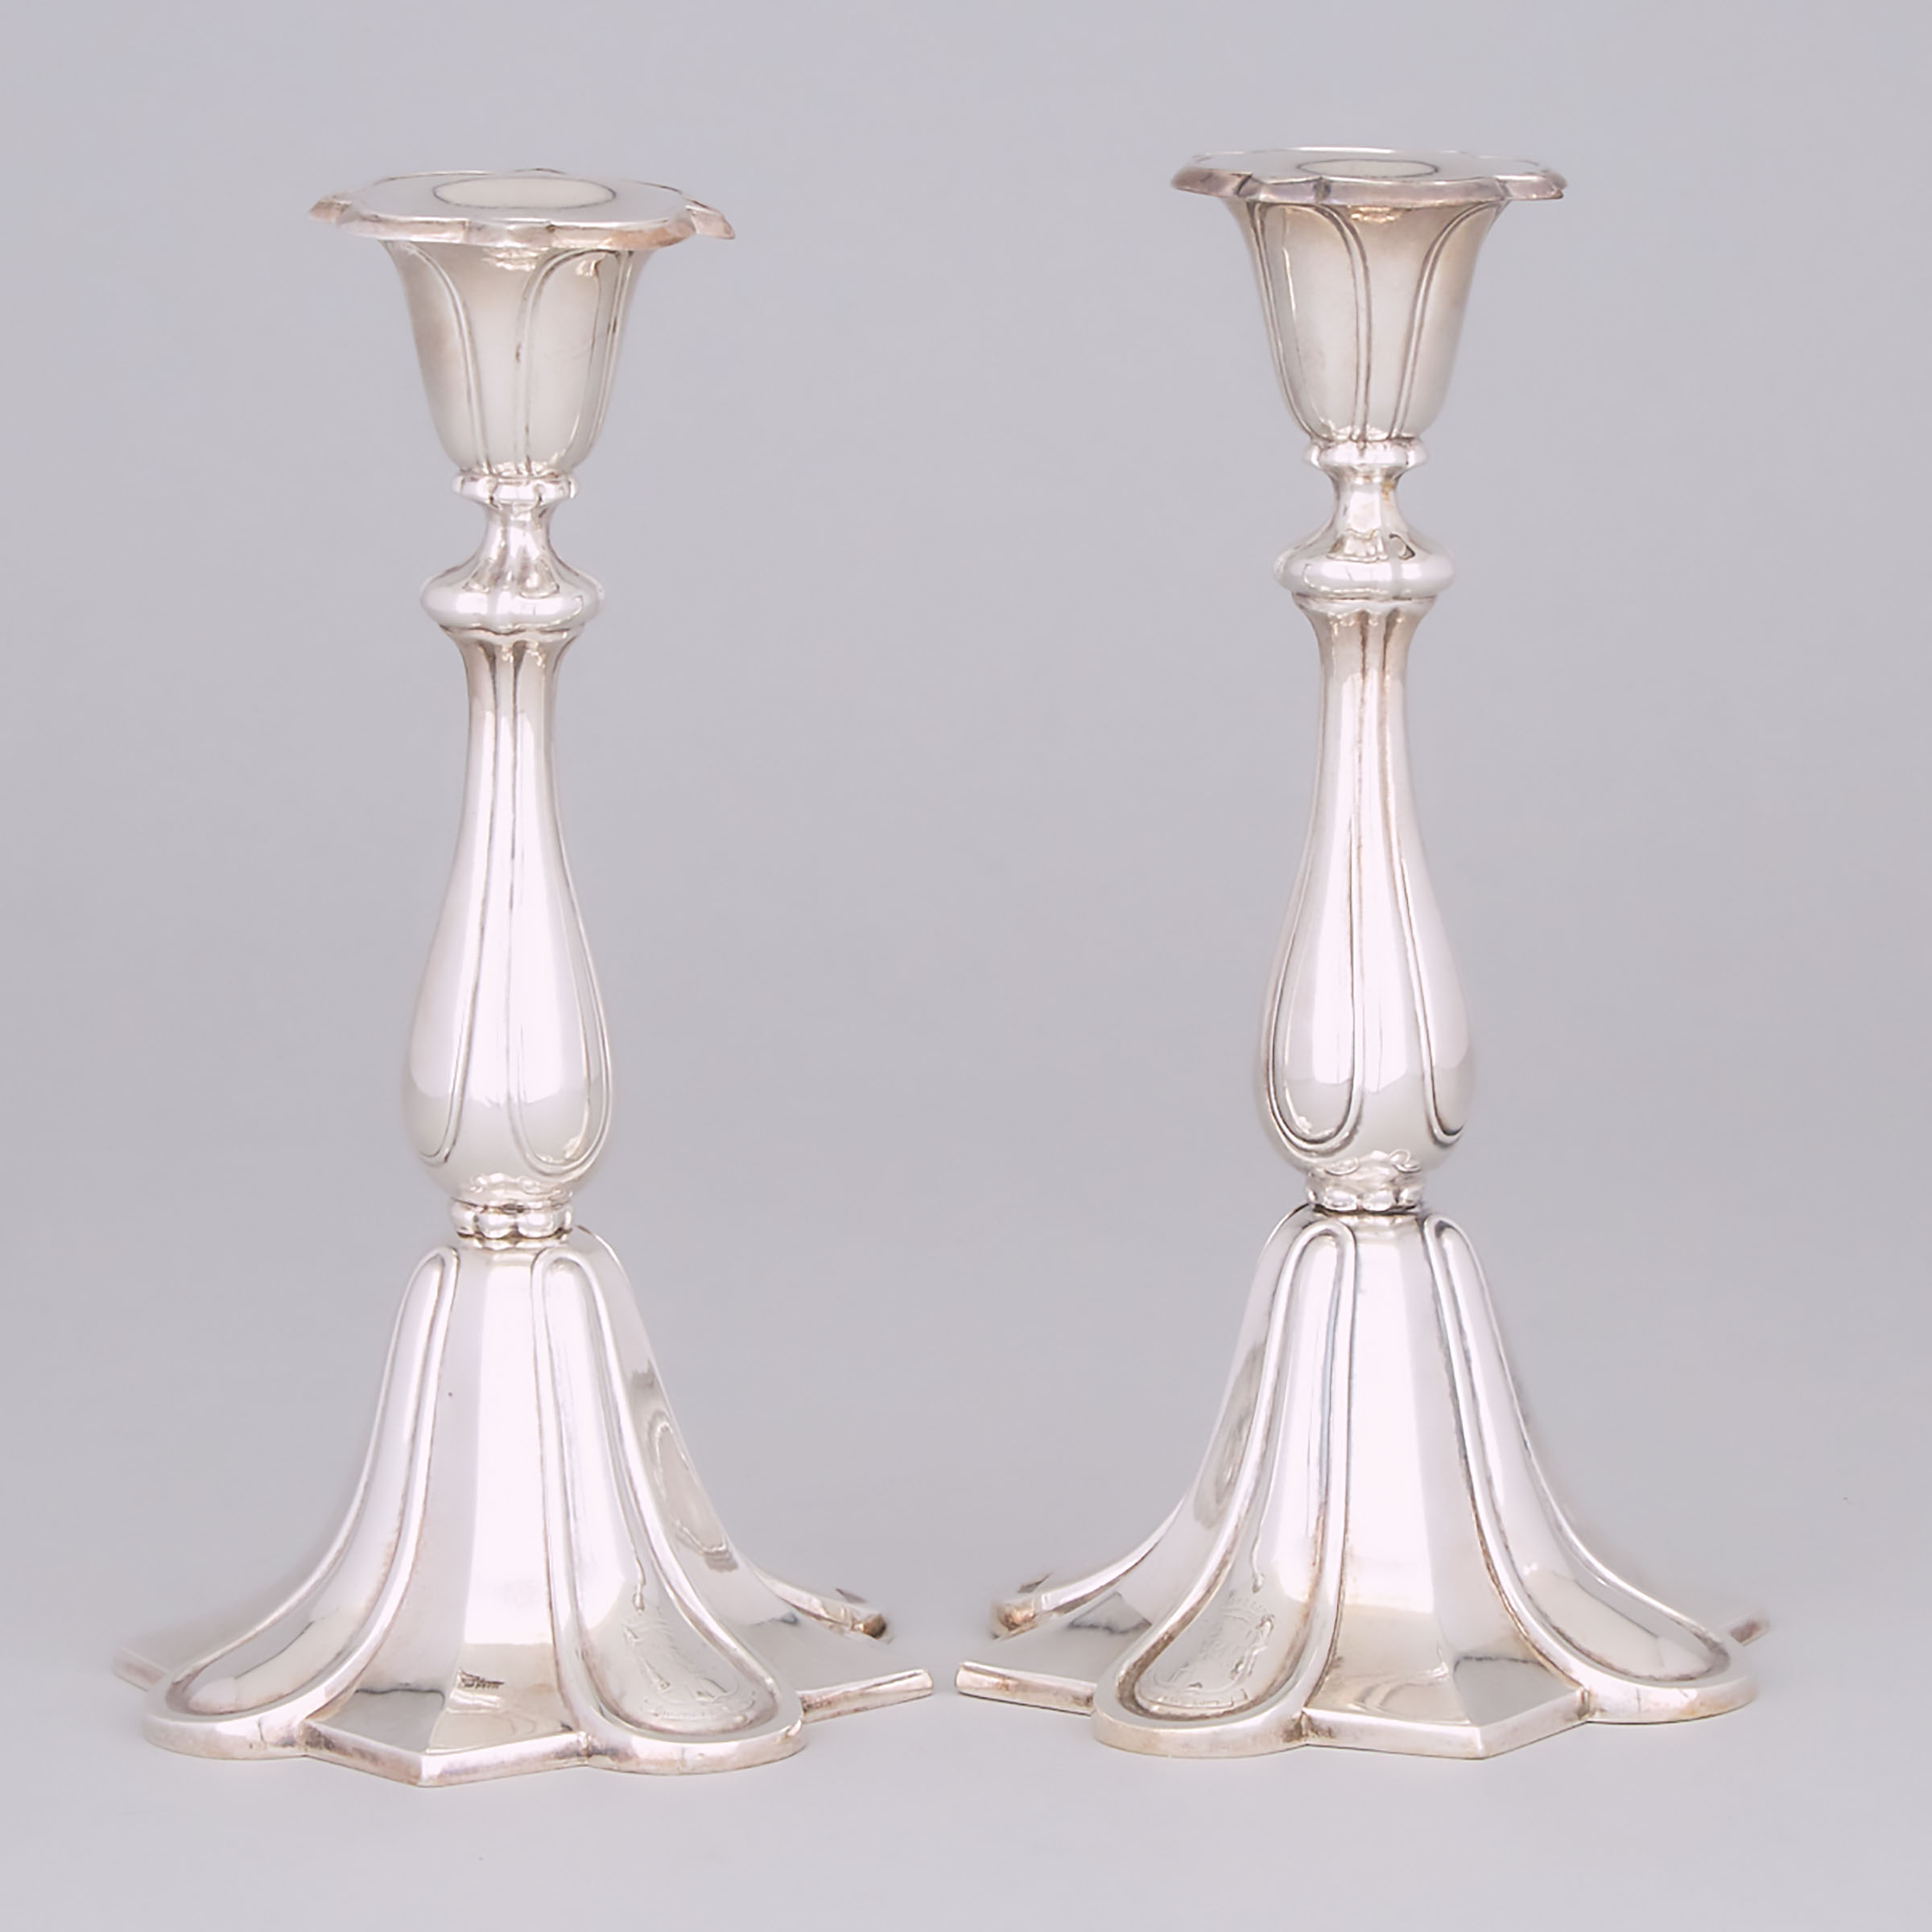 Pair of Russian Silver Table Candlesticks, St. Petersburg, 1858